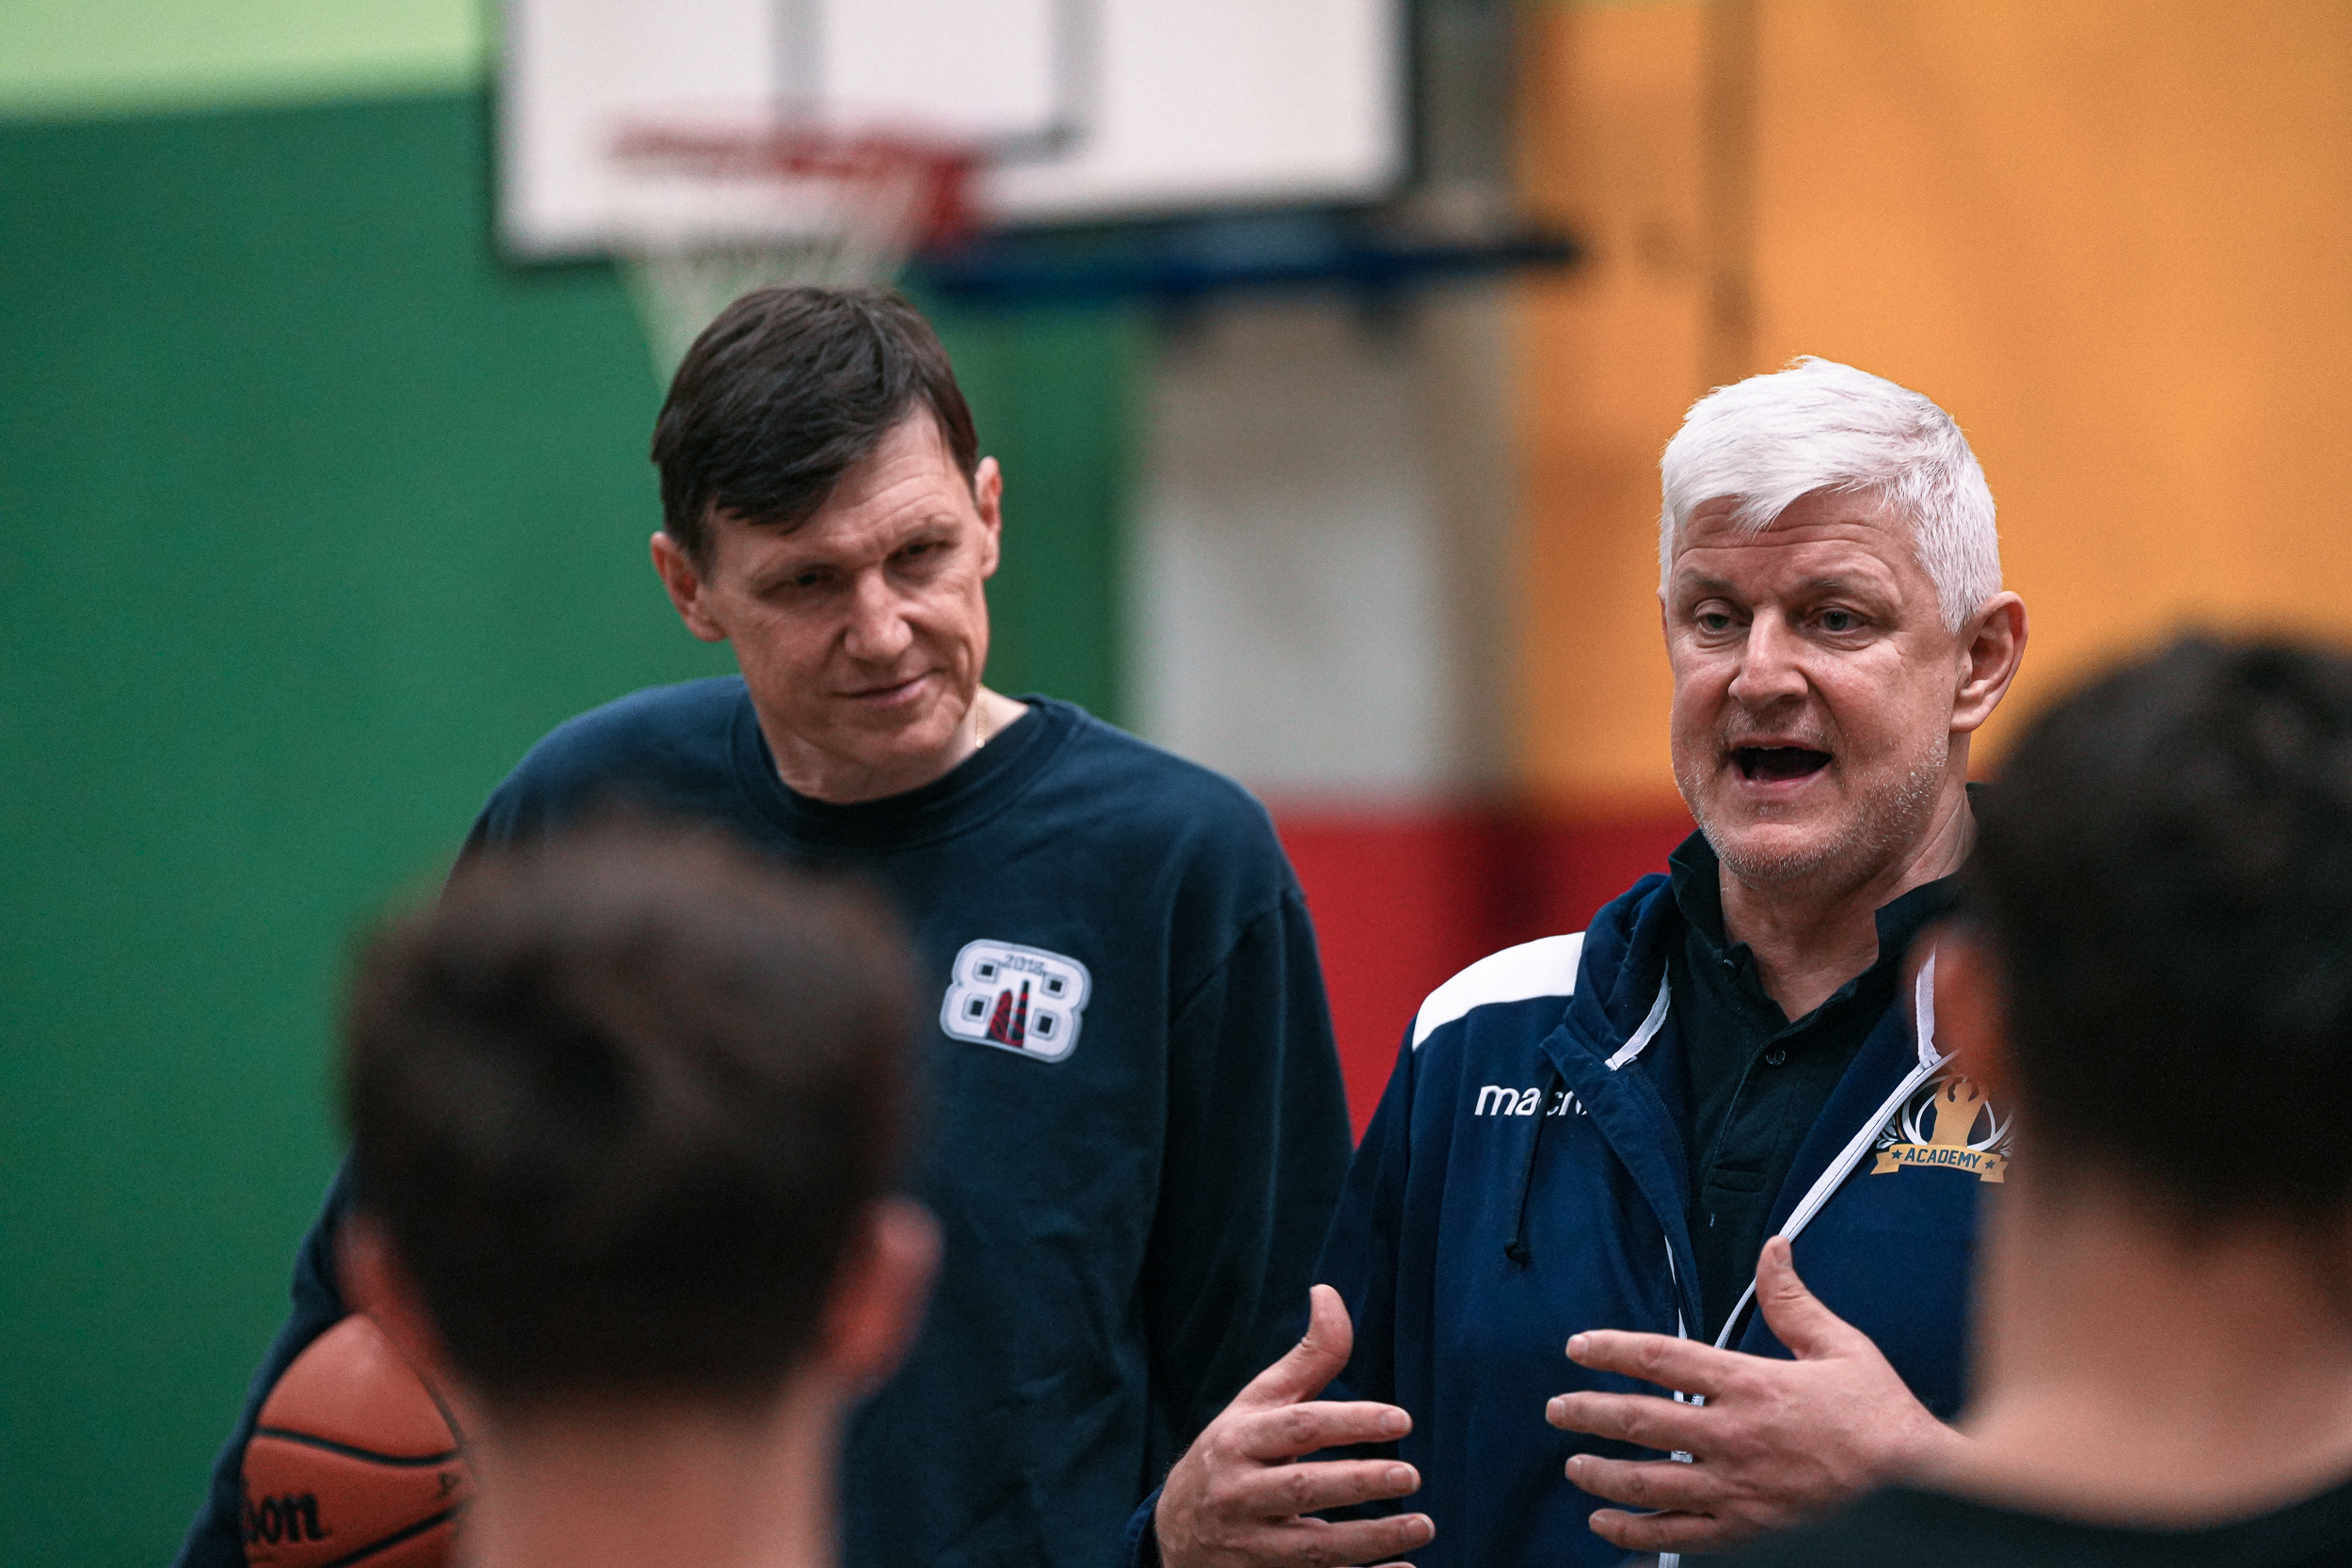 Gregor Fučka special guest at the IBA Masterclass in Turin